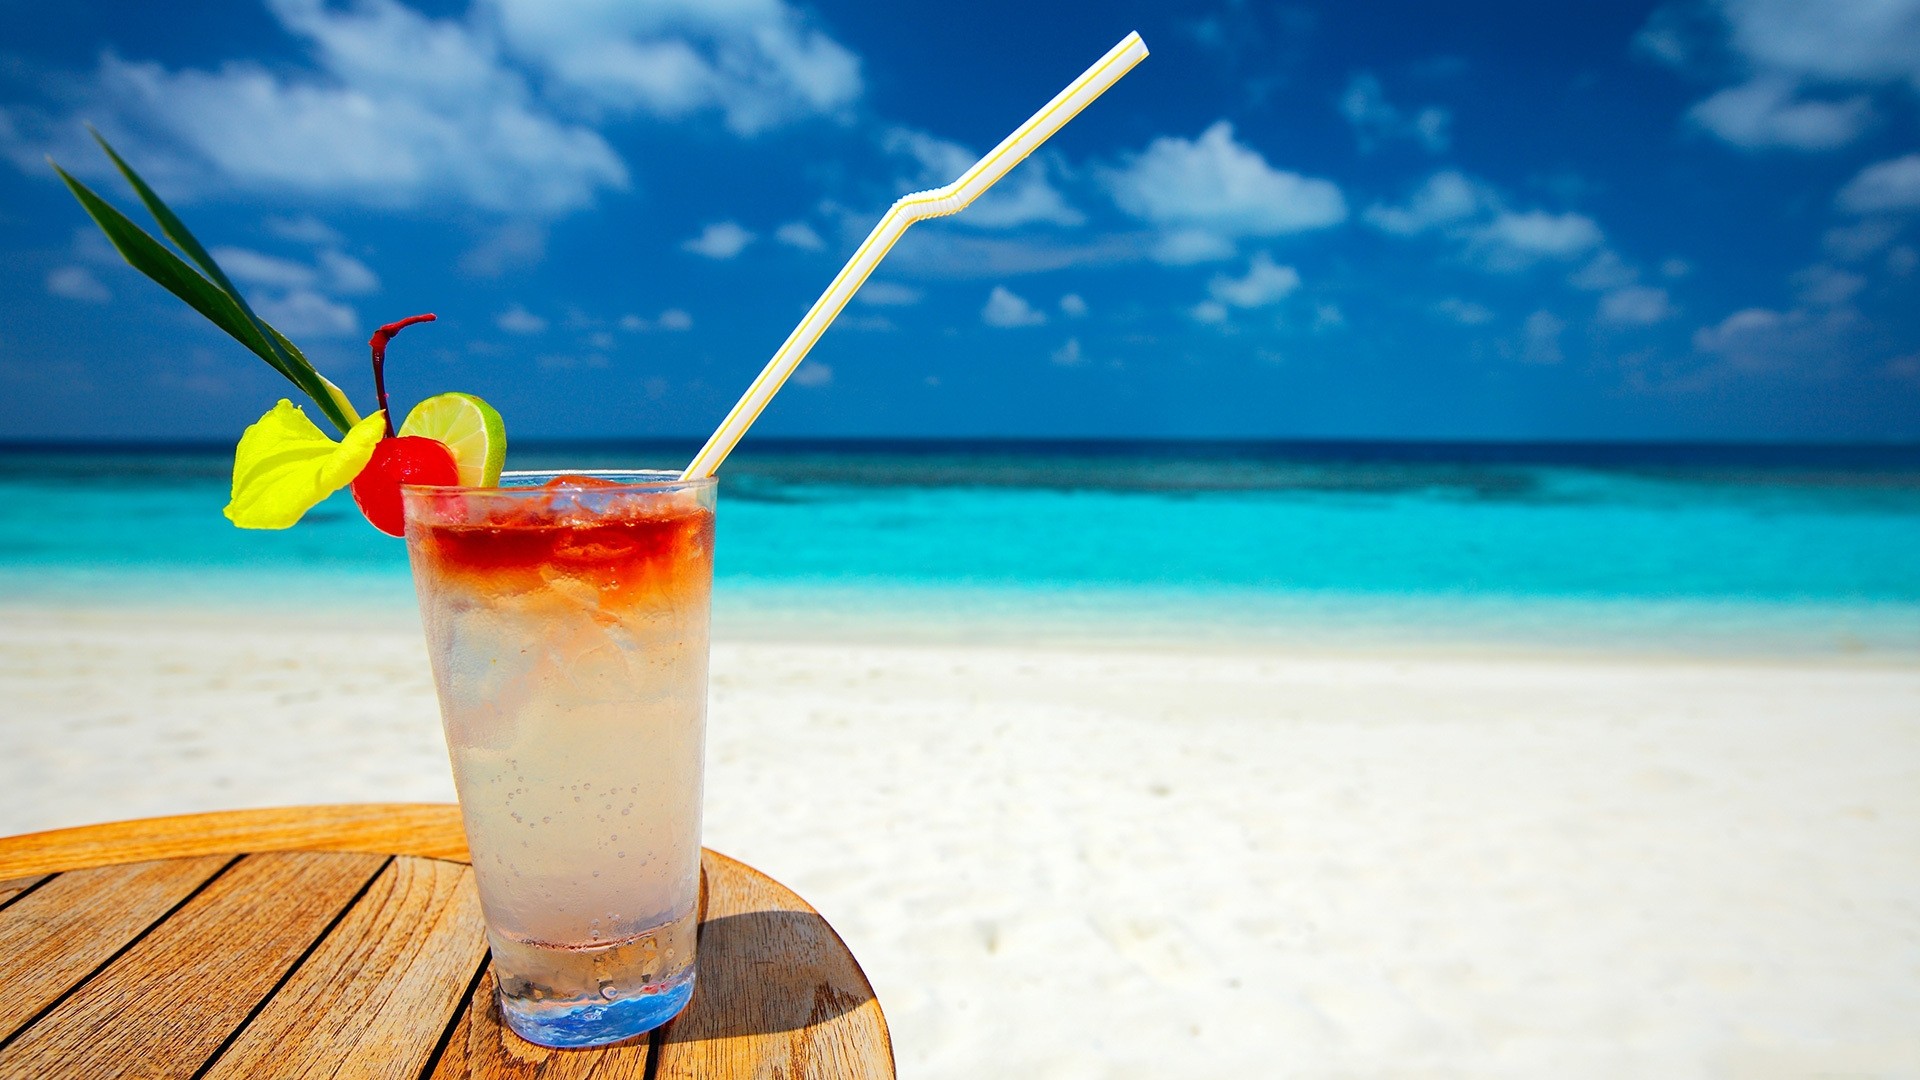 tropical cocktail holidays beaches wallpaper background